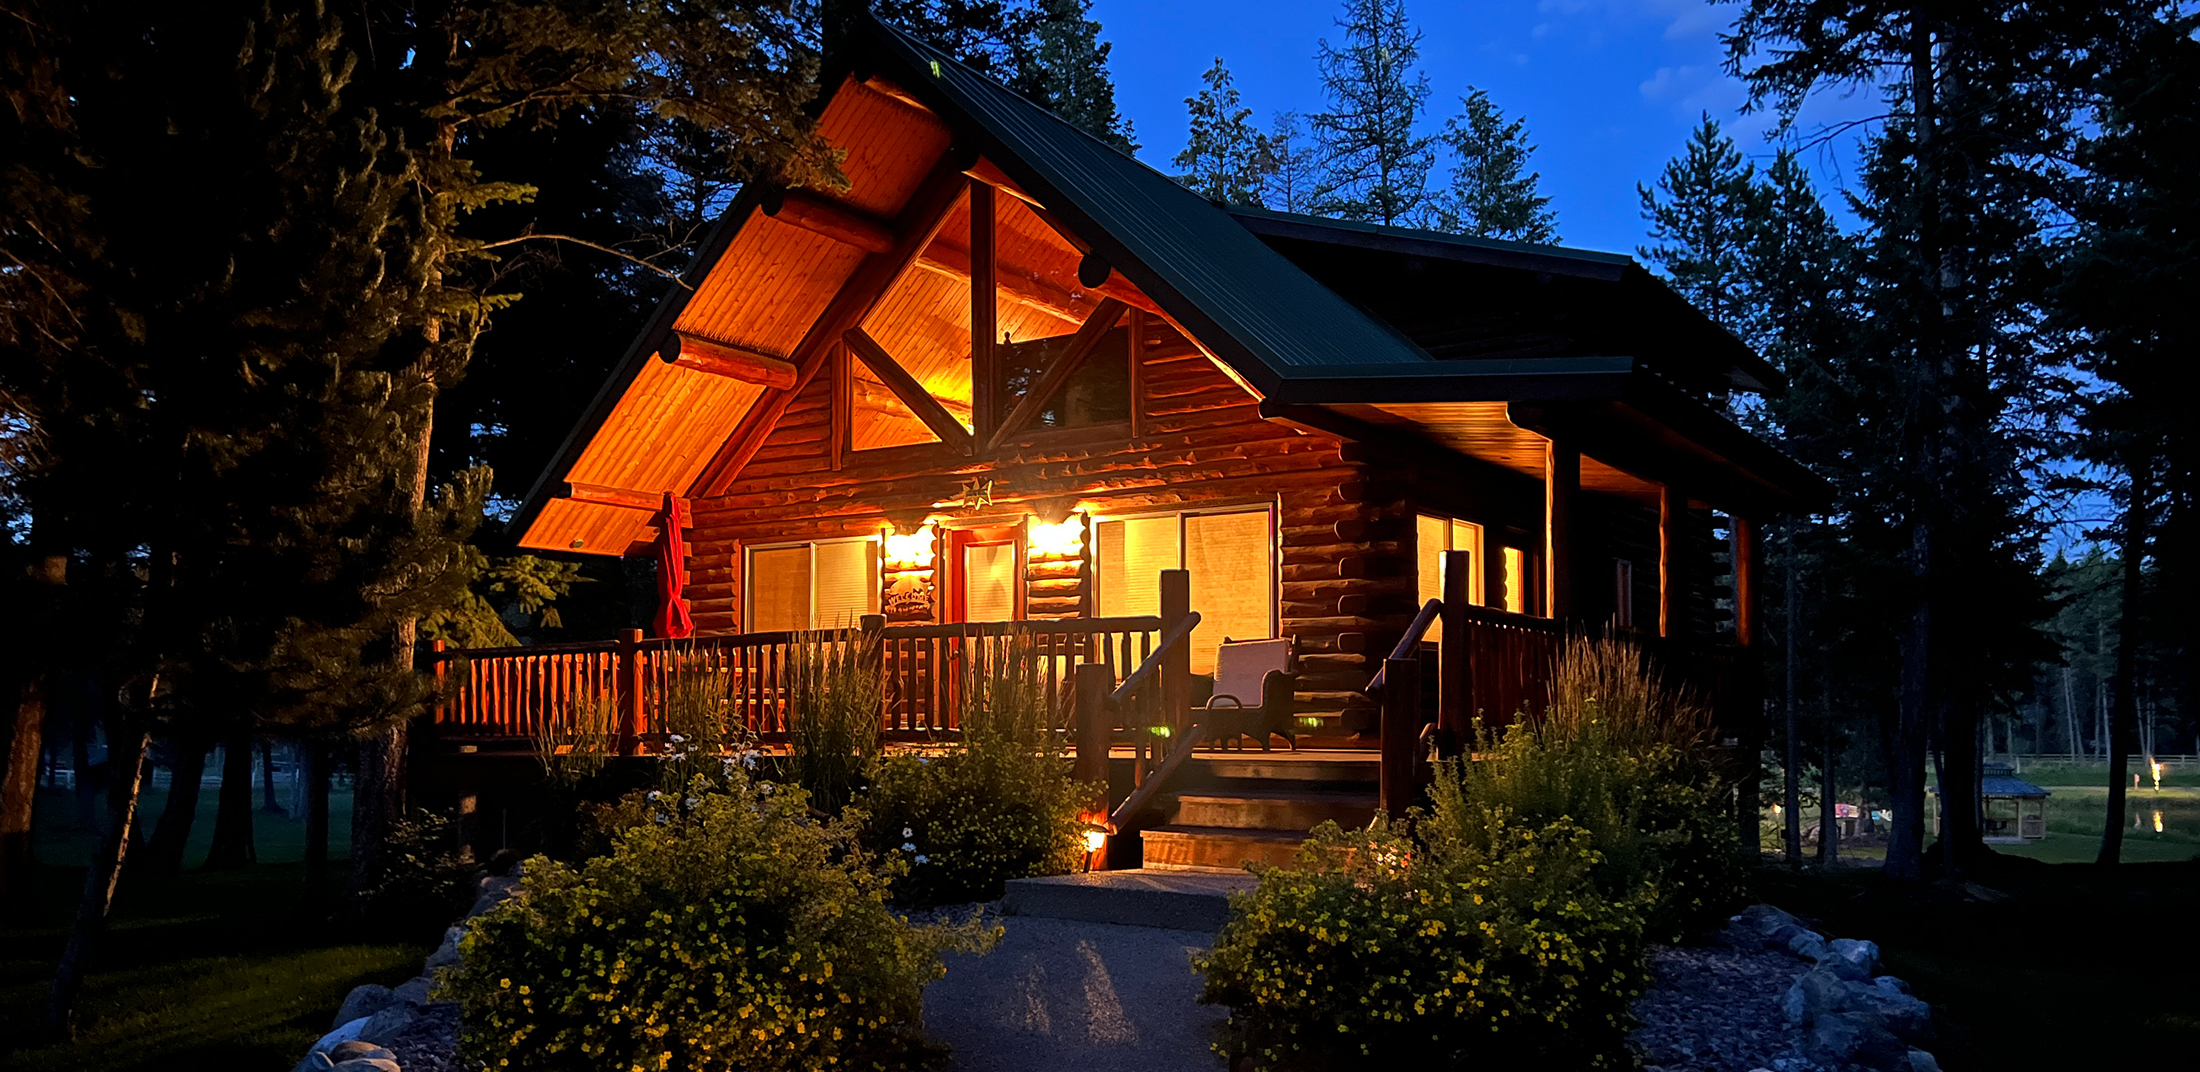 Haymoon Resort | The Best Place to Stay in Whitefish, MT